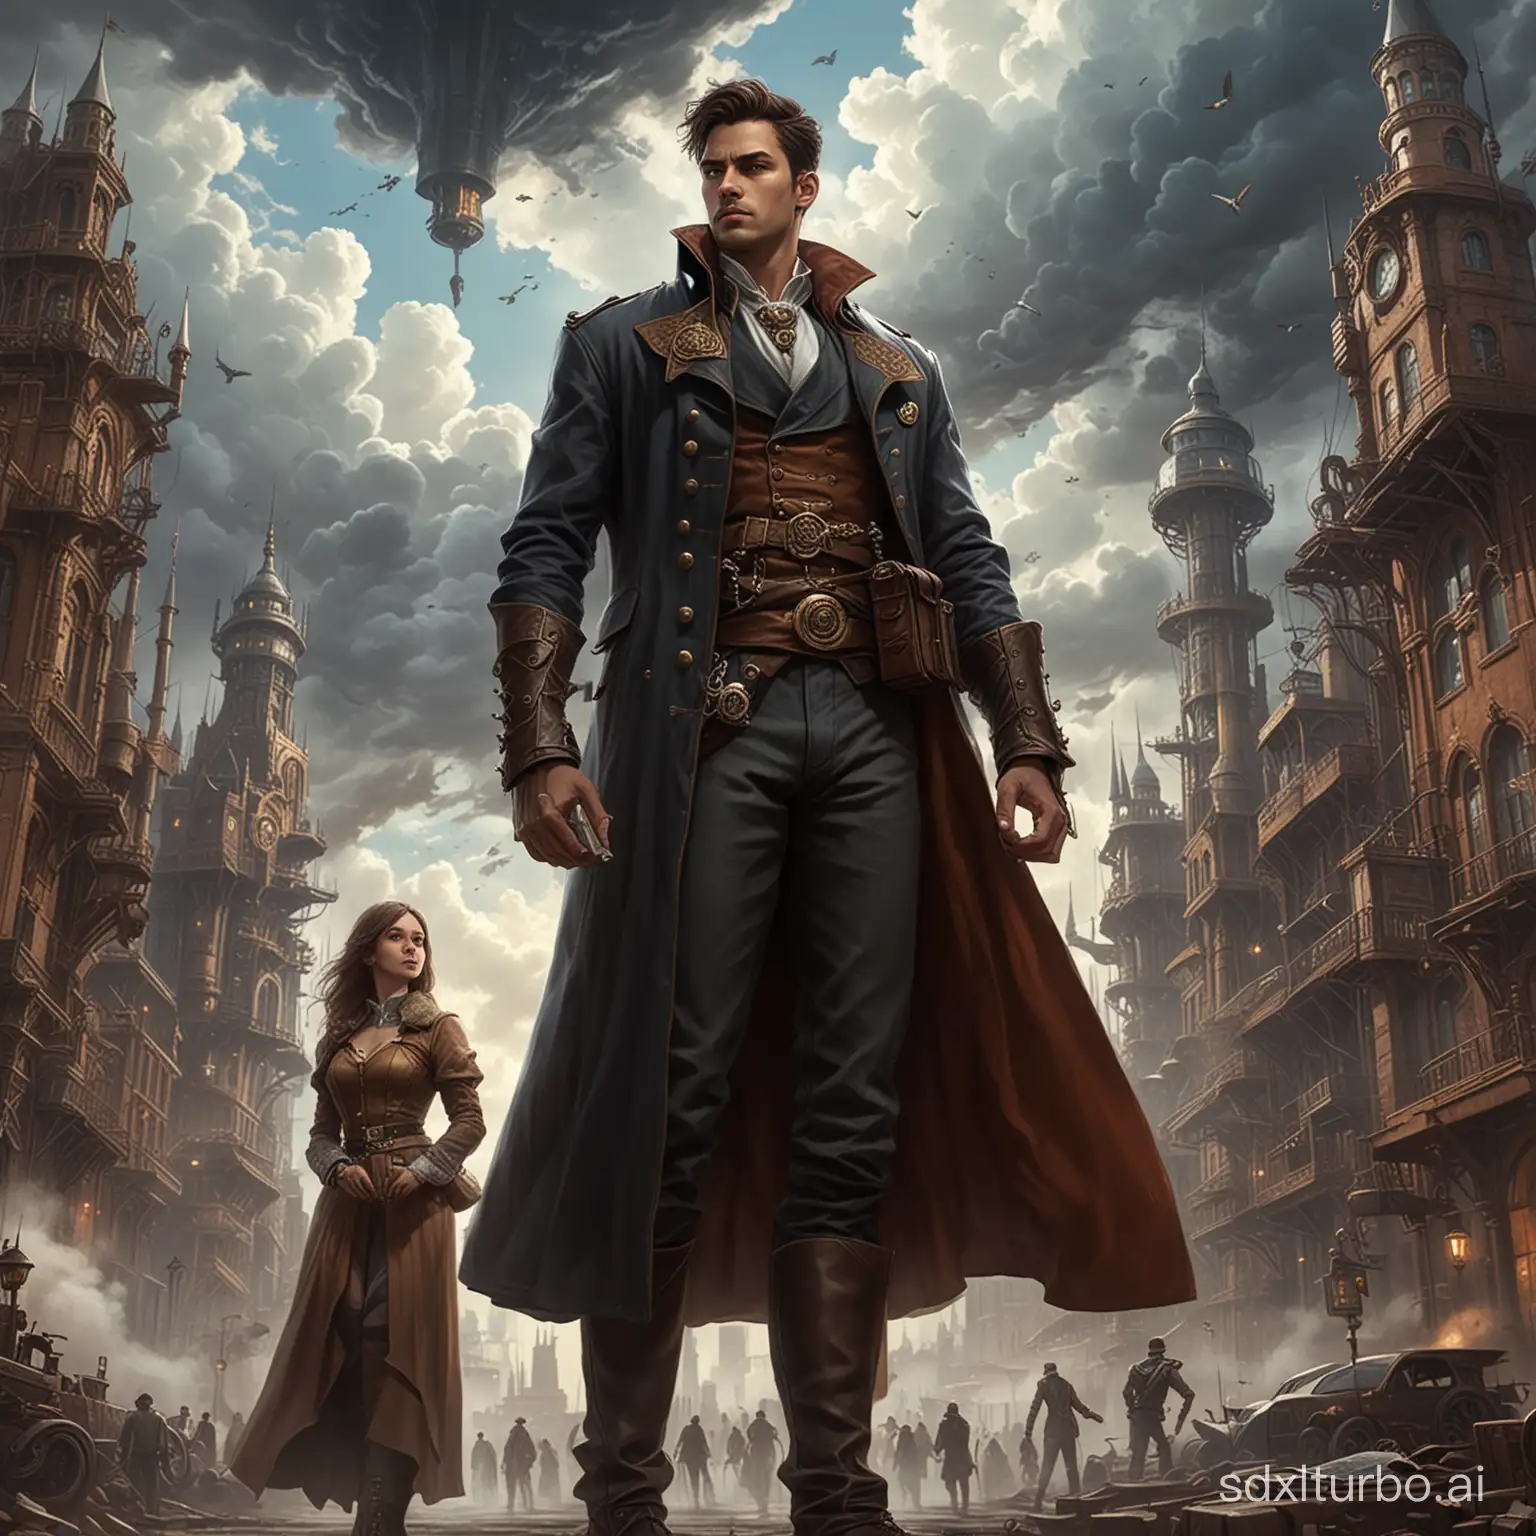 A bustling steampunk-inspired city with tall towers and industrial machinery, set against a dramatic cloudy sky. In the foreground, a young man in simple clothing stands protectively in front of a regal-looking prince wearing finery. To the side, a woman wearing a long coat holds an ancient tome, magic swirling around her hands. Behind them looms a shadowy figure, possibly a criminal mastermind, plotting sinister plans. The overall scene should convey a sense of impending conflict, romance, and the clash between duty and destiny.